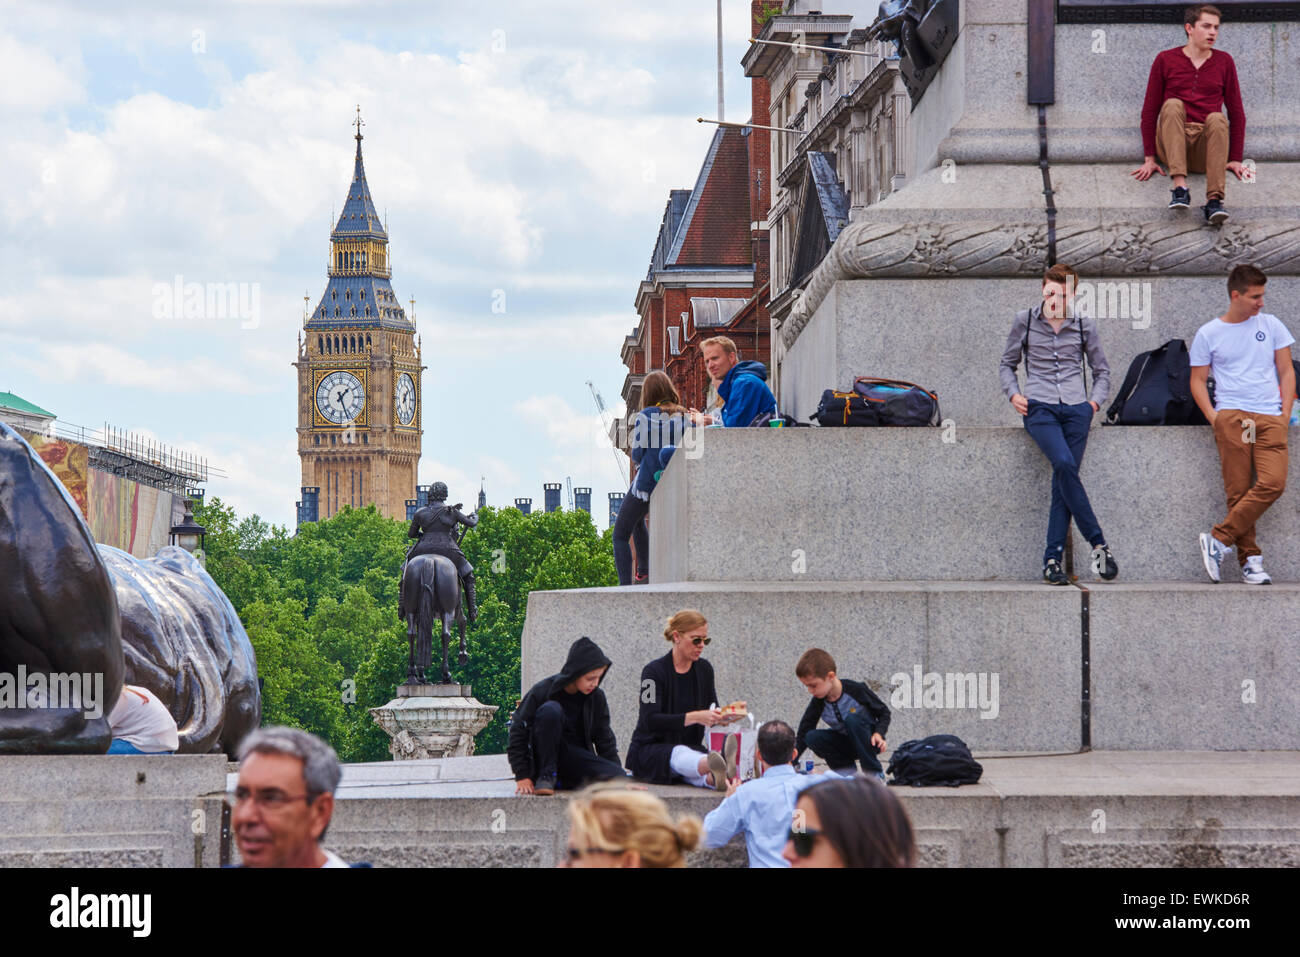 LONDON, UK - JUNE 15: Tourists sitting on the steps of Trafalgar Square, with Big Ben in the background. June 15, 2015 in London Stock Photo